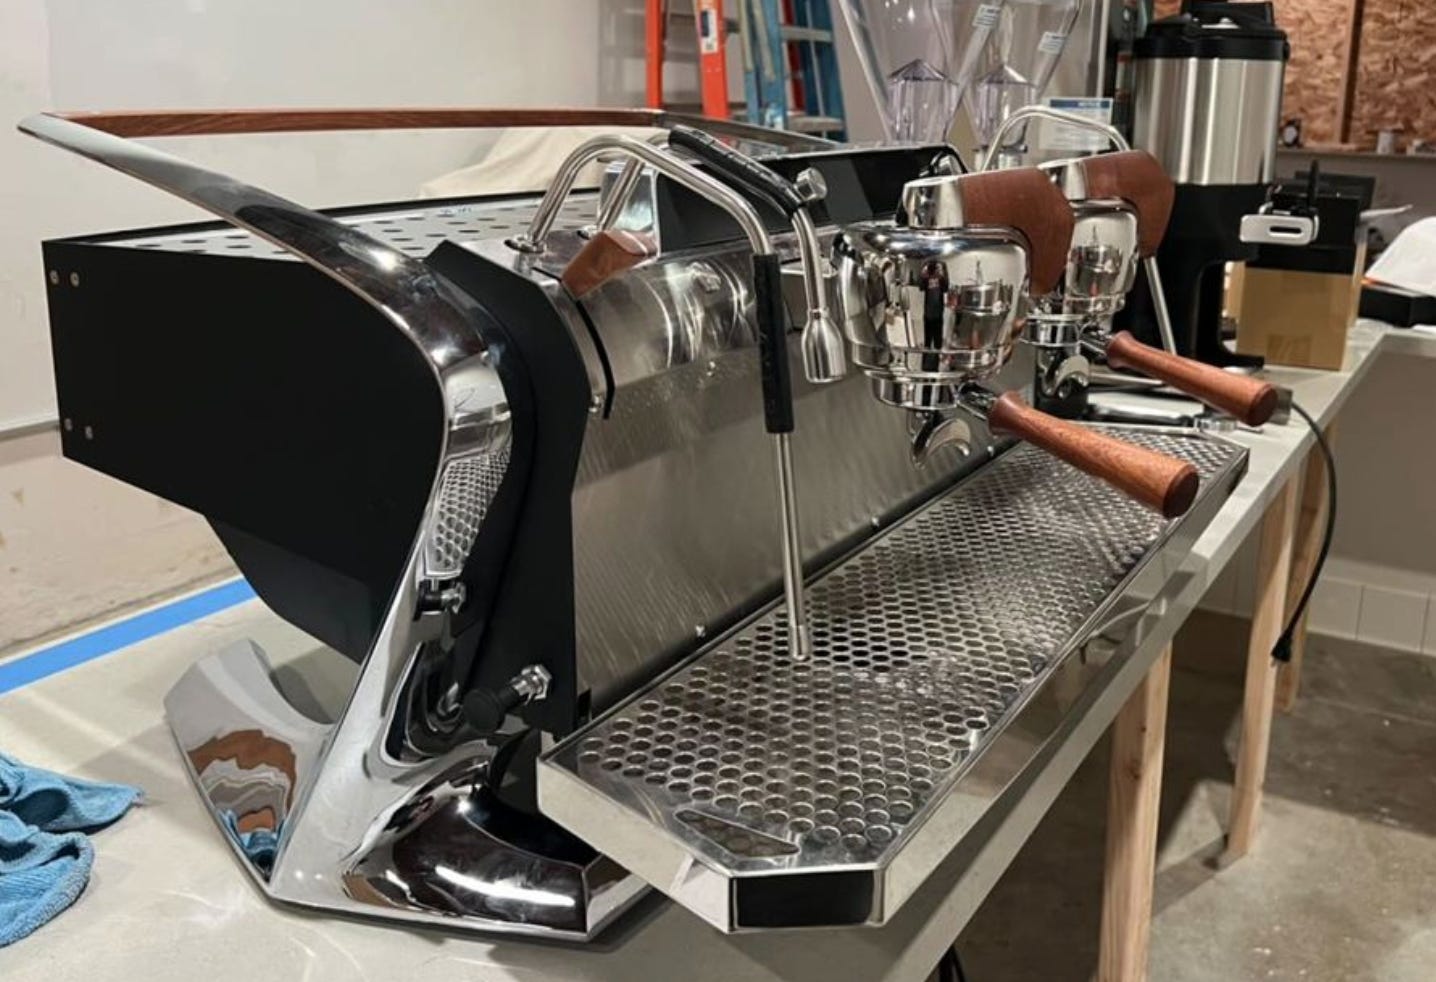 A close-up of a stainless steel espresso machine with two portafilters with wood handles. The machine has black trim.